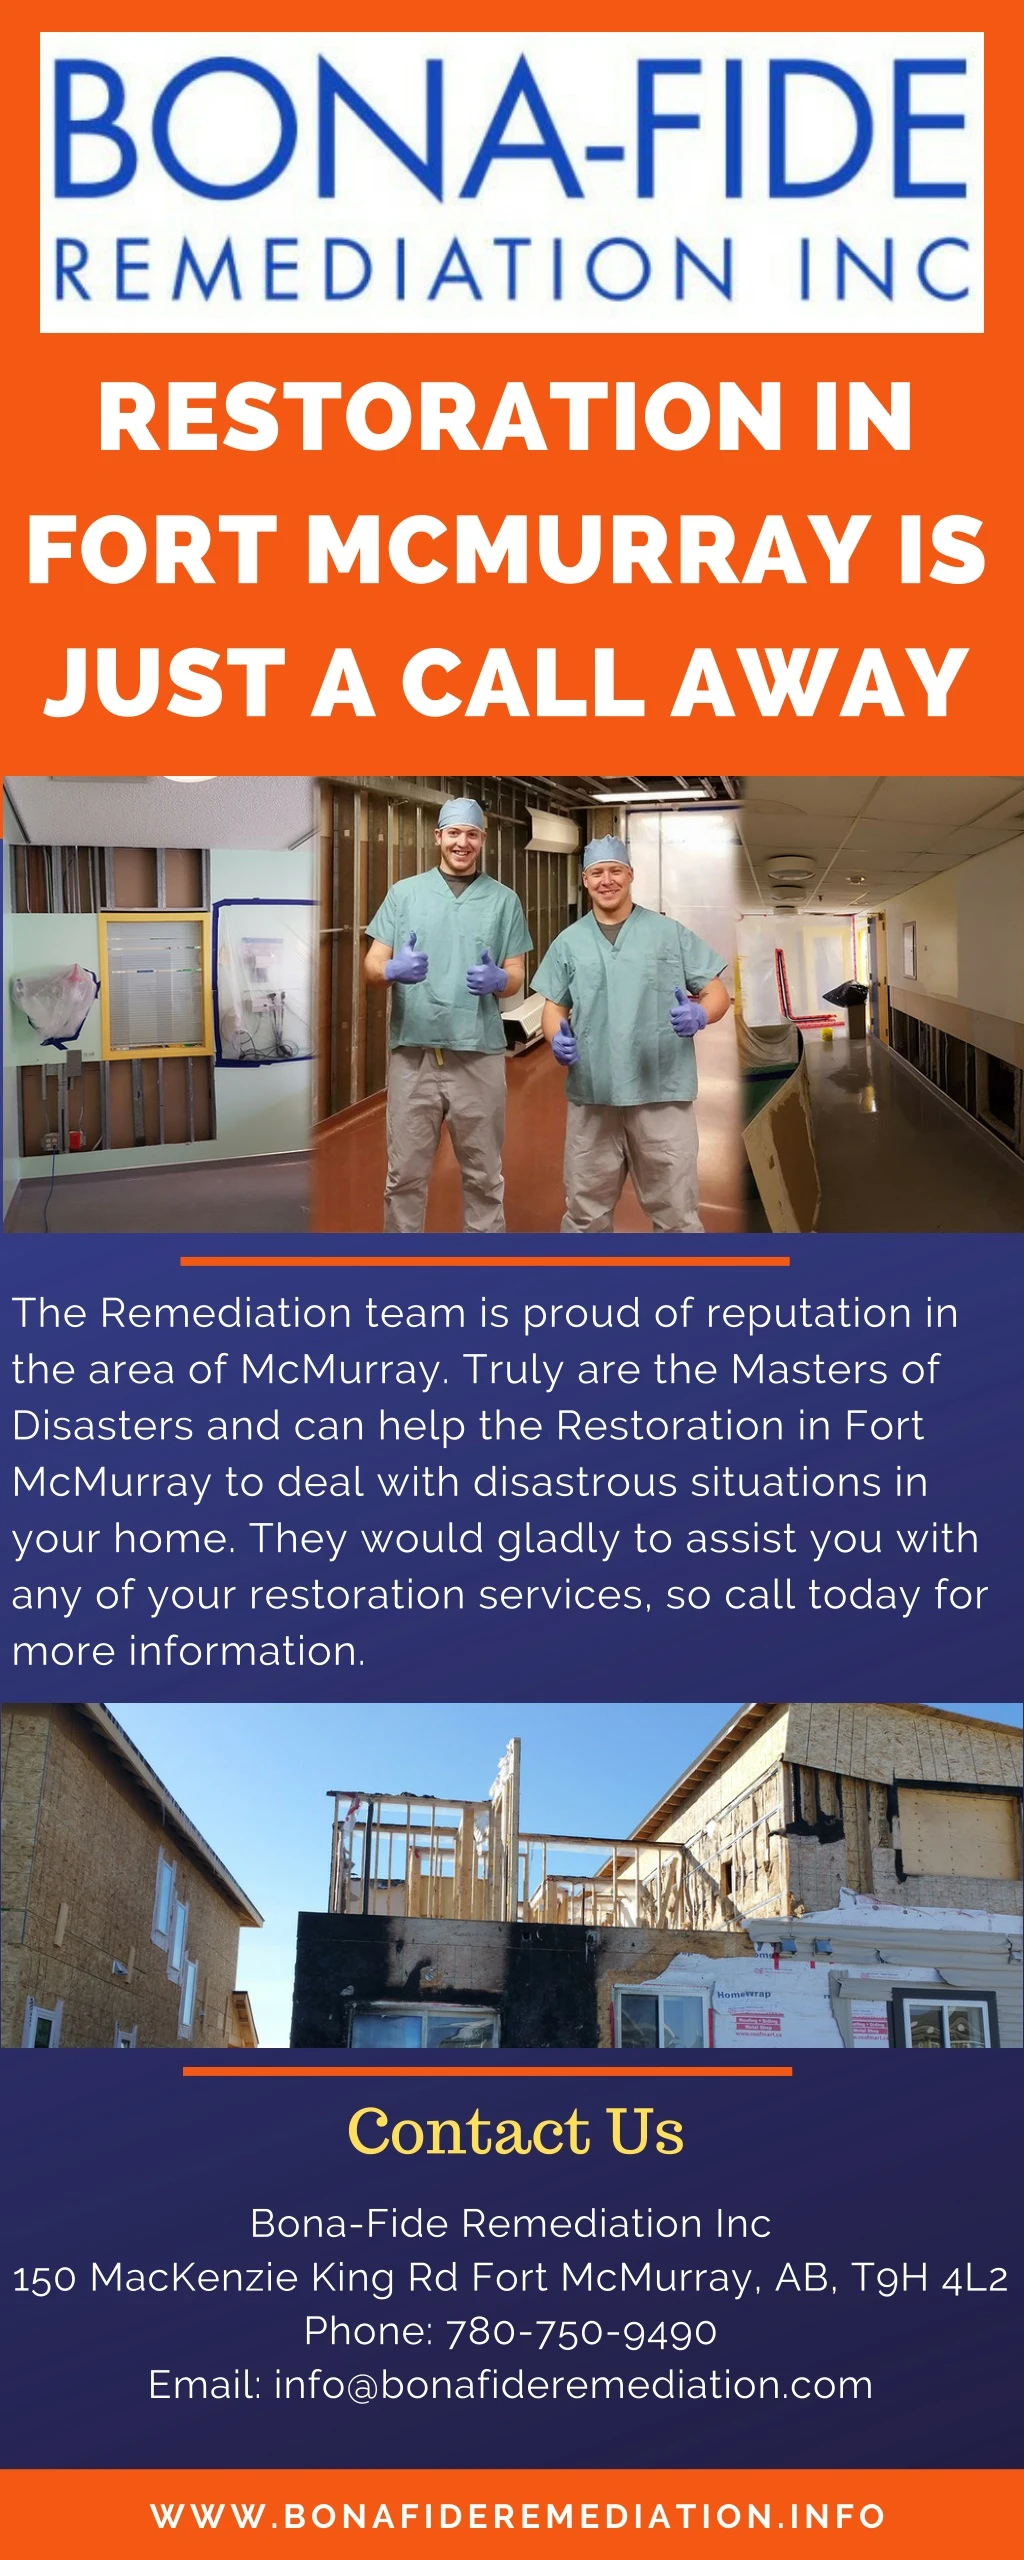 restoration in fort mcmurray is just a call away